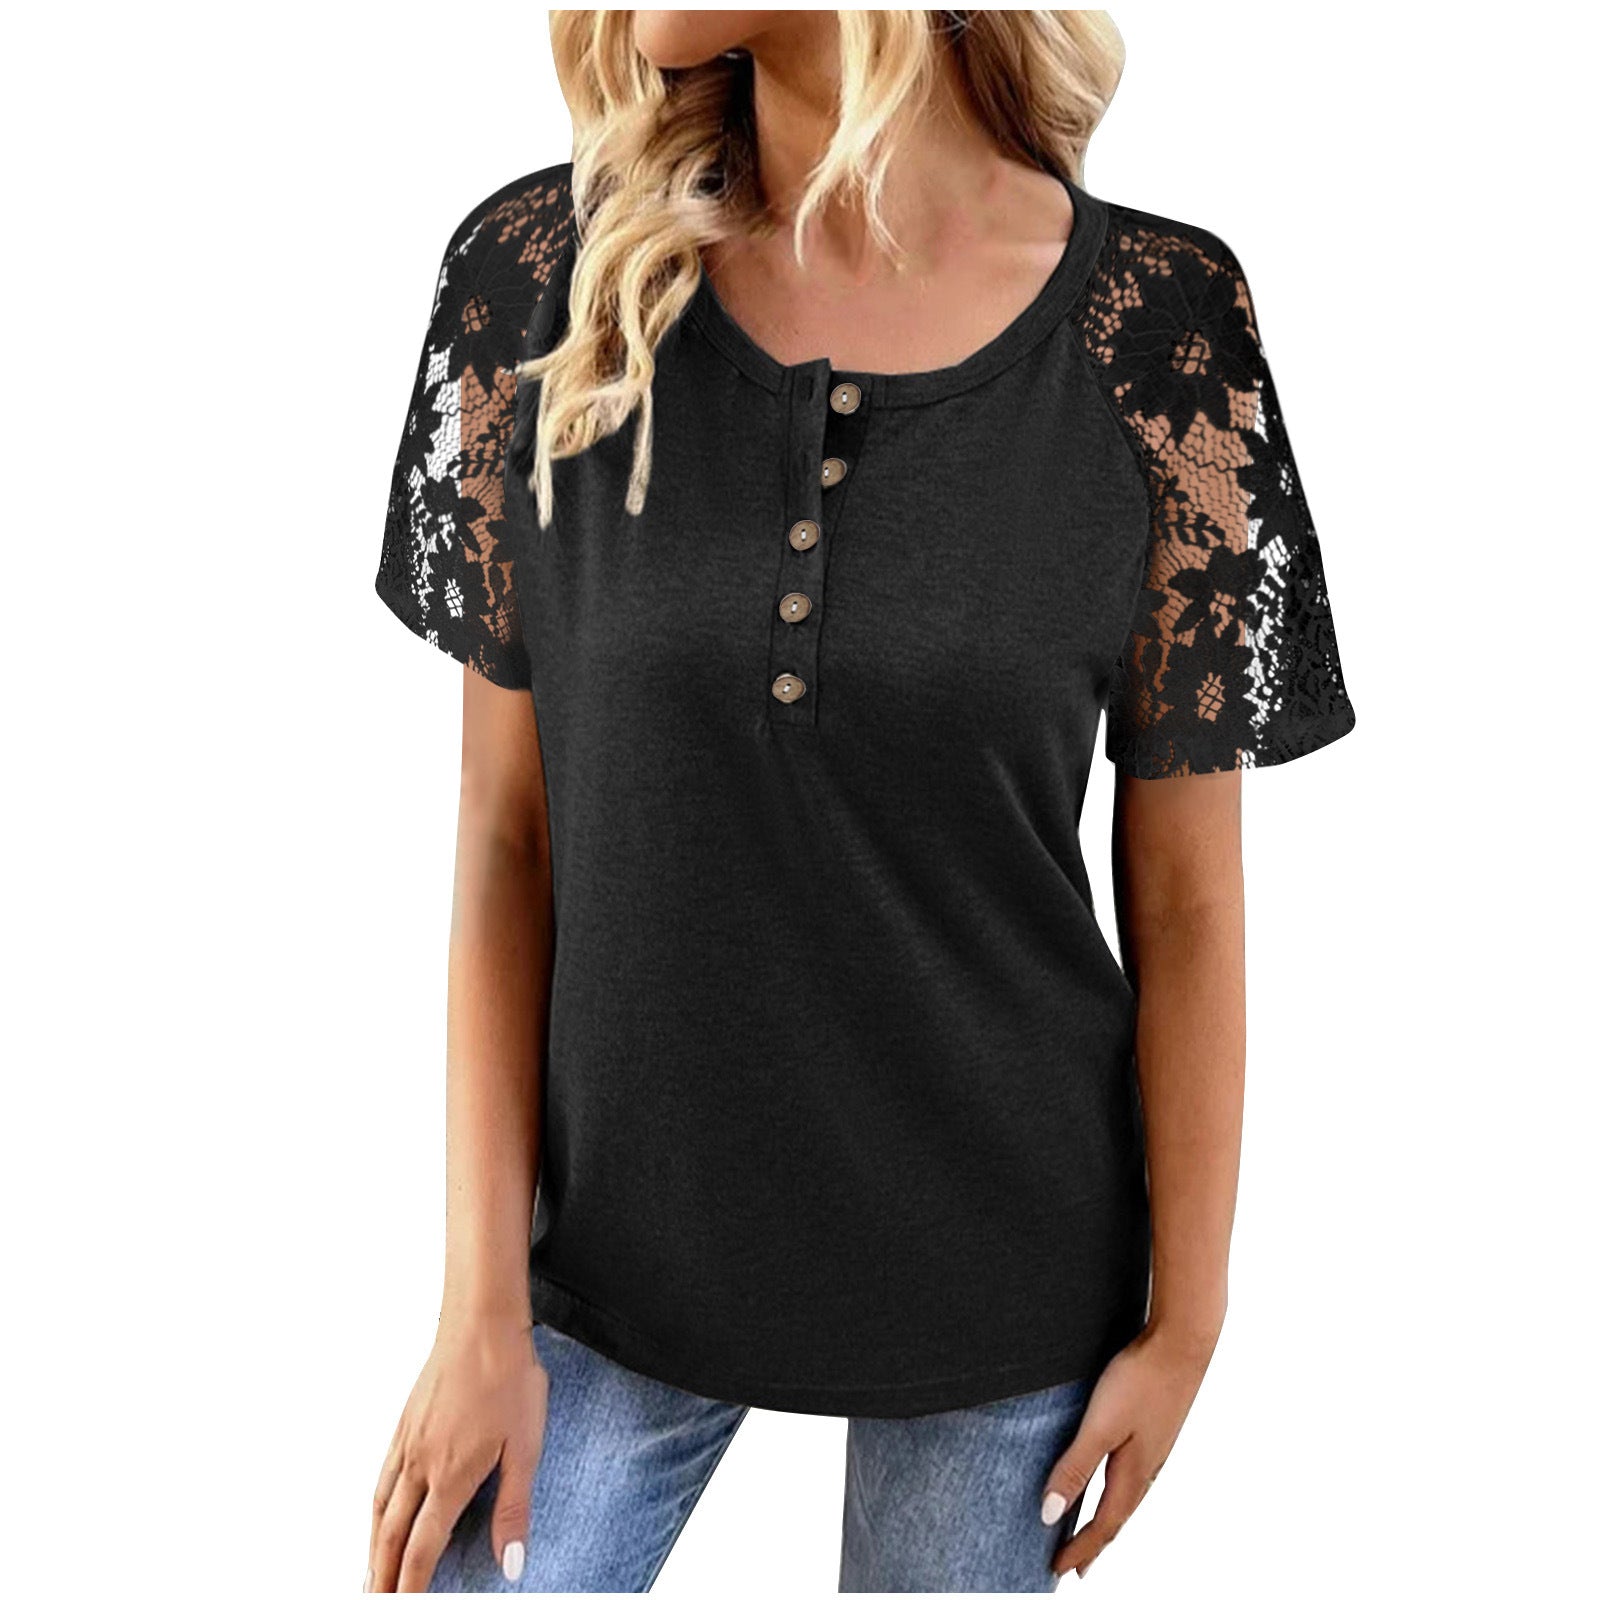 Women's Classy Wear Hollow Stitching Short-sleeved Blouses